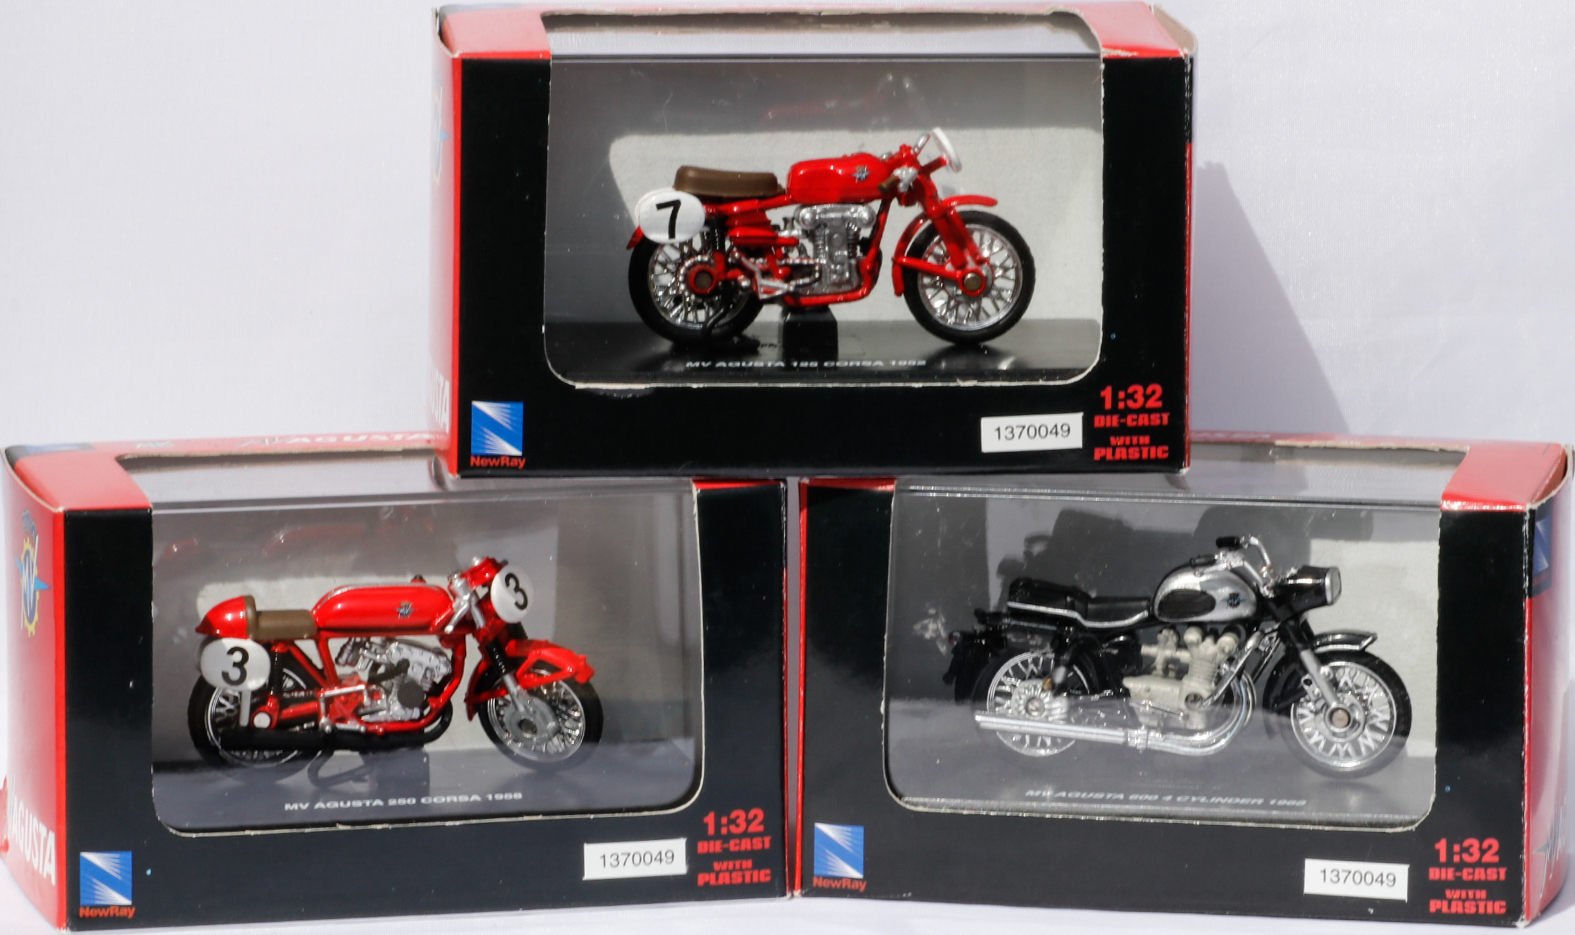 New-Ray toys 1:12 and 1:32 scale model motorcycles